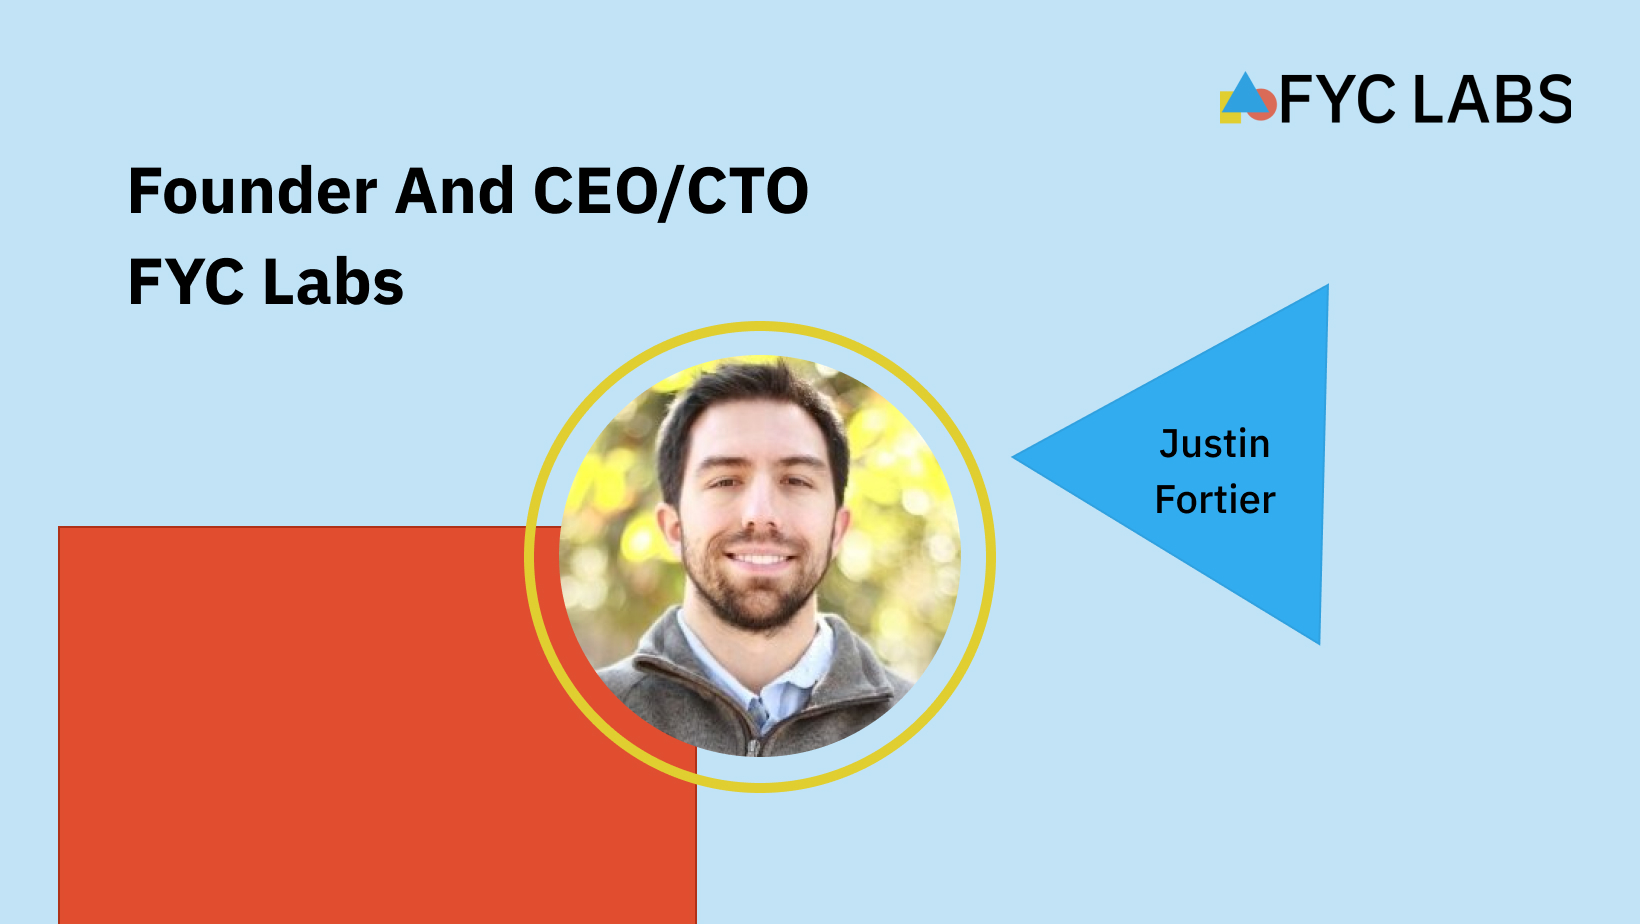 FYC Labs Founder and CEO/CTO Justin Fortier